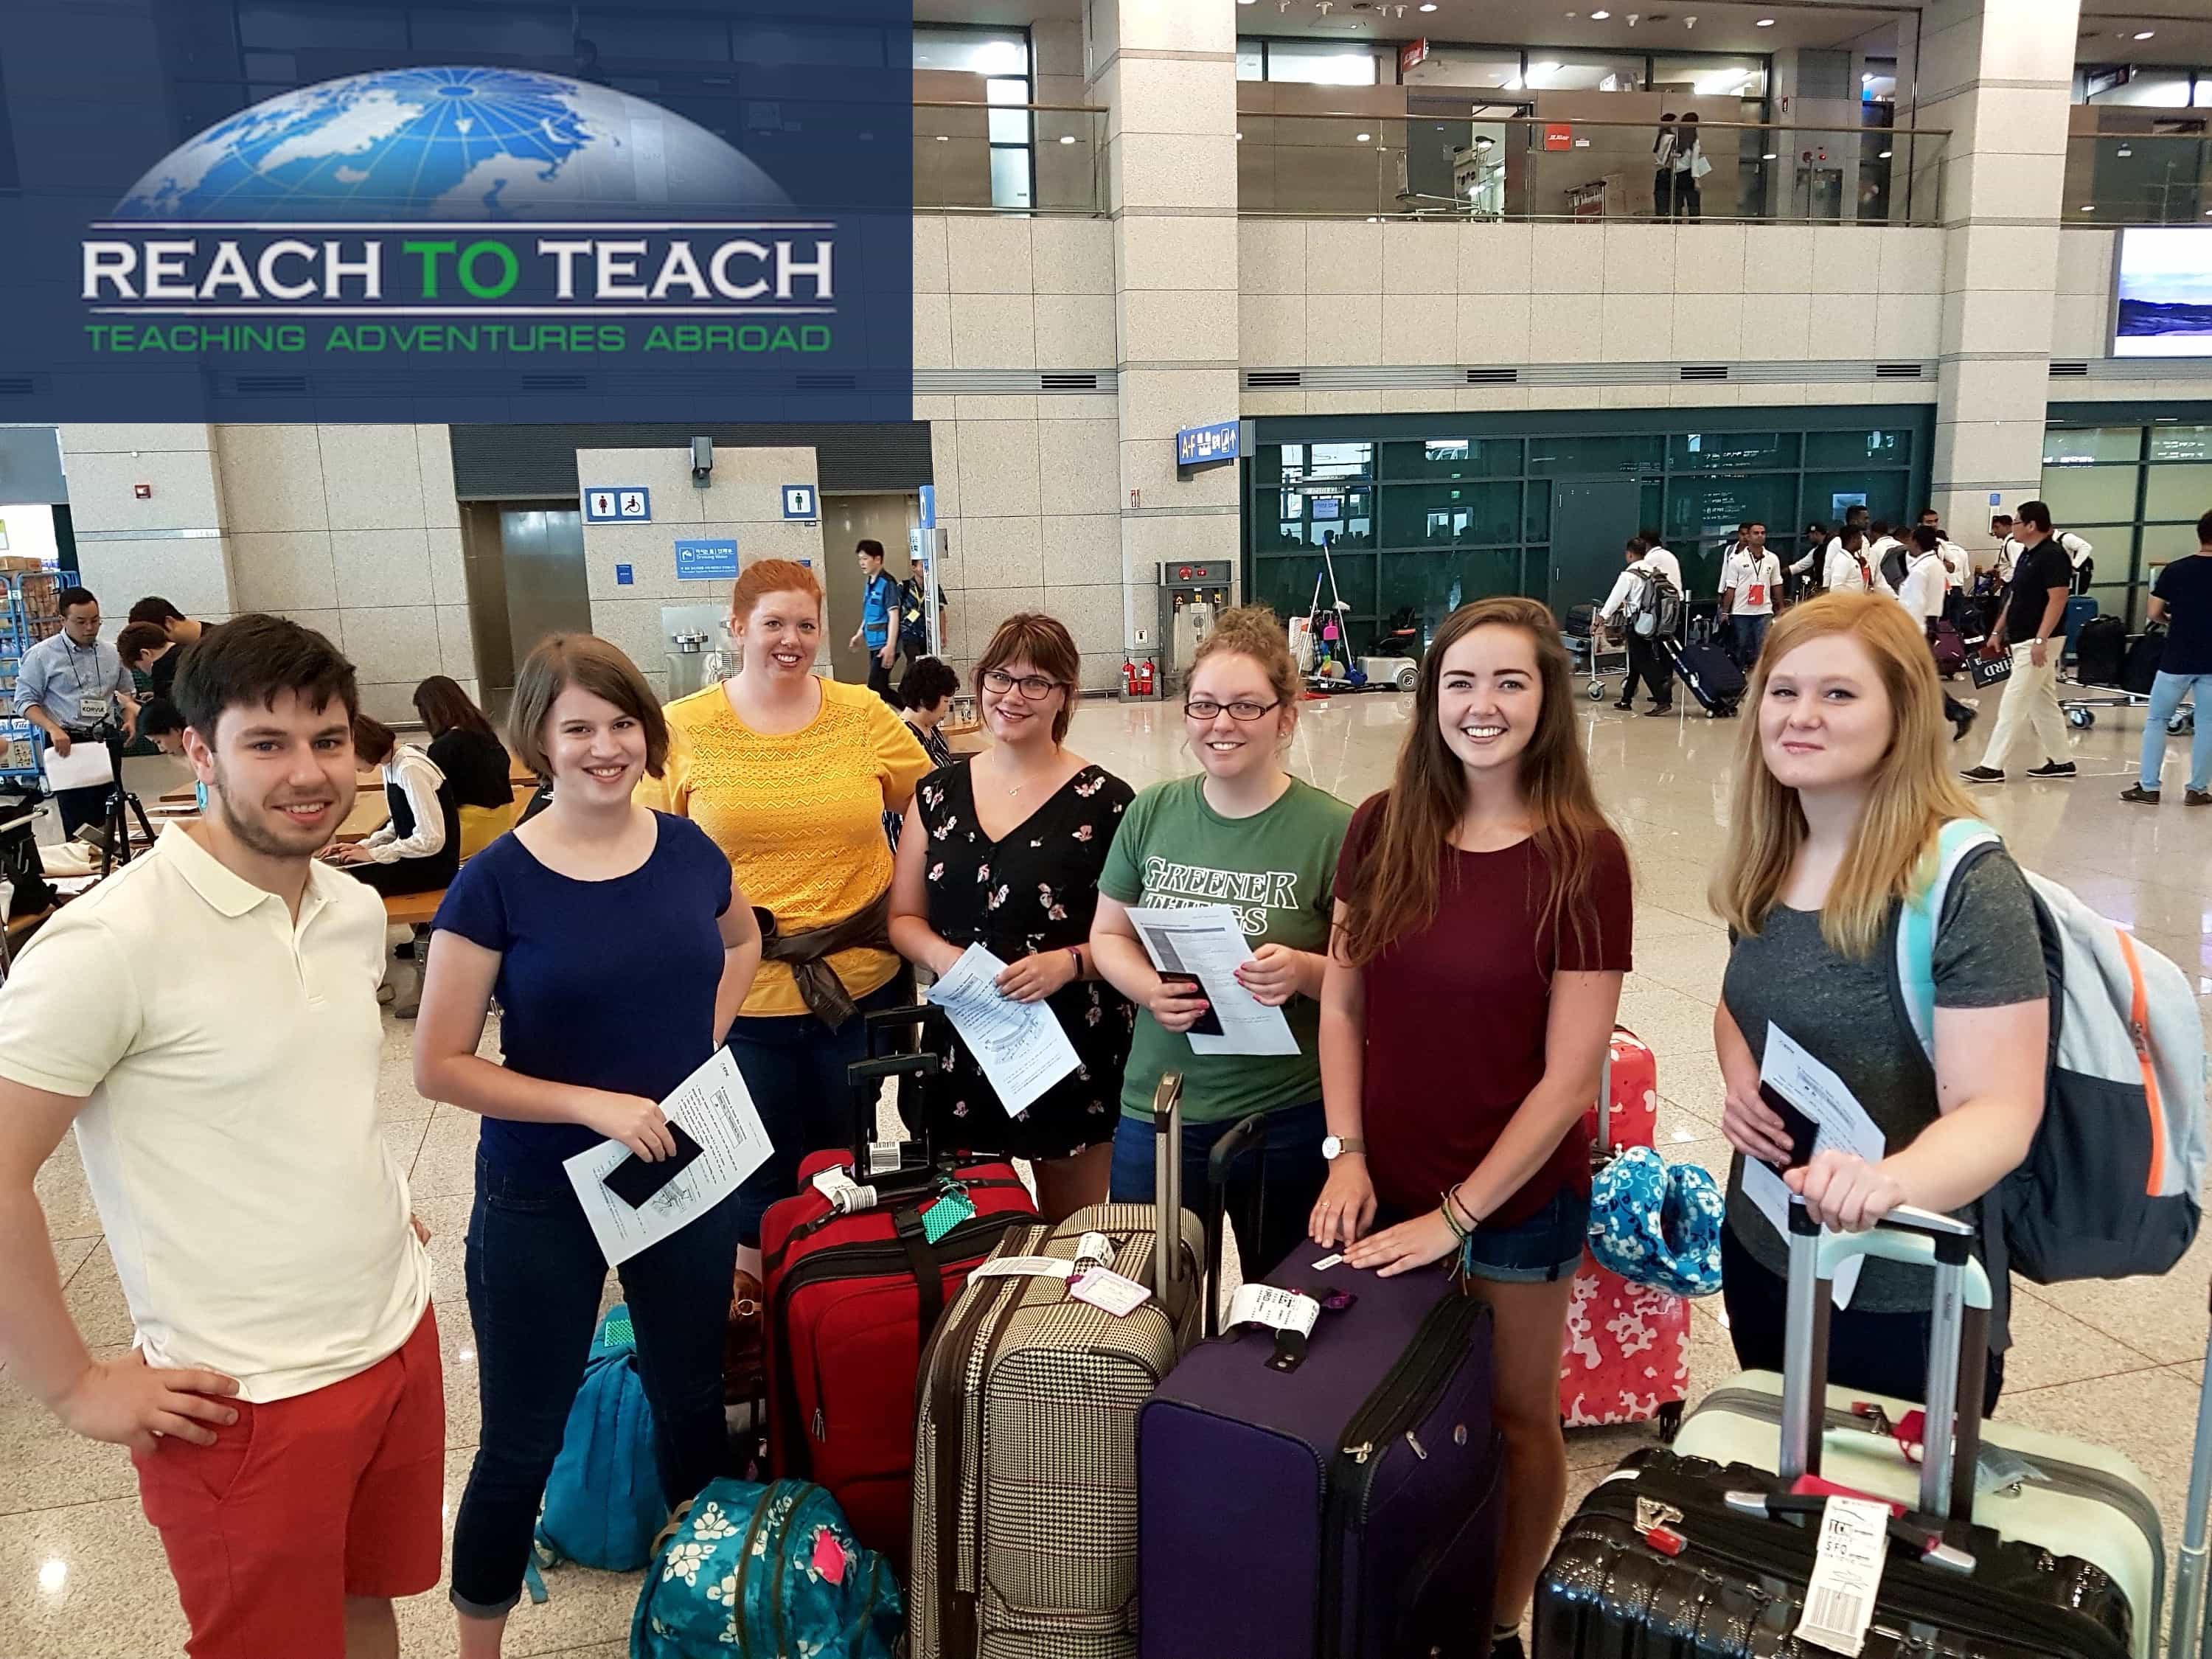 a group of new TEFL teachers arrived at the airport with reach to teach